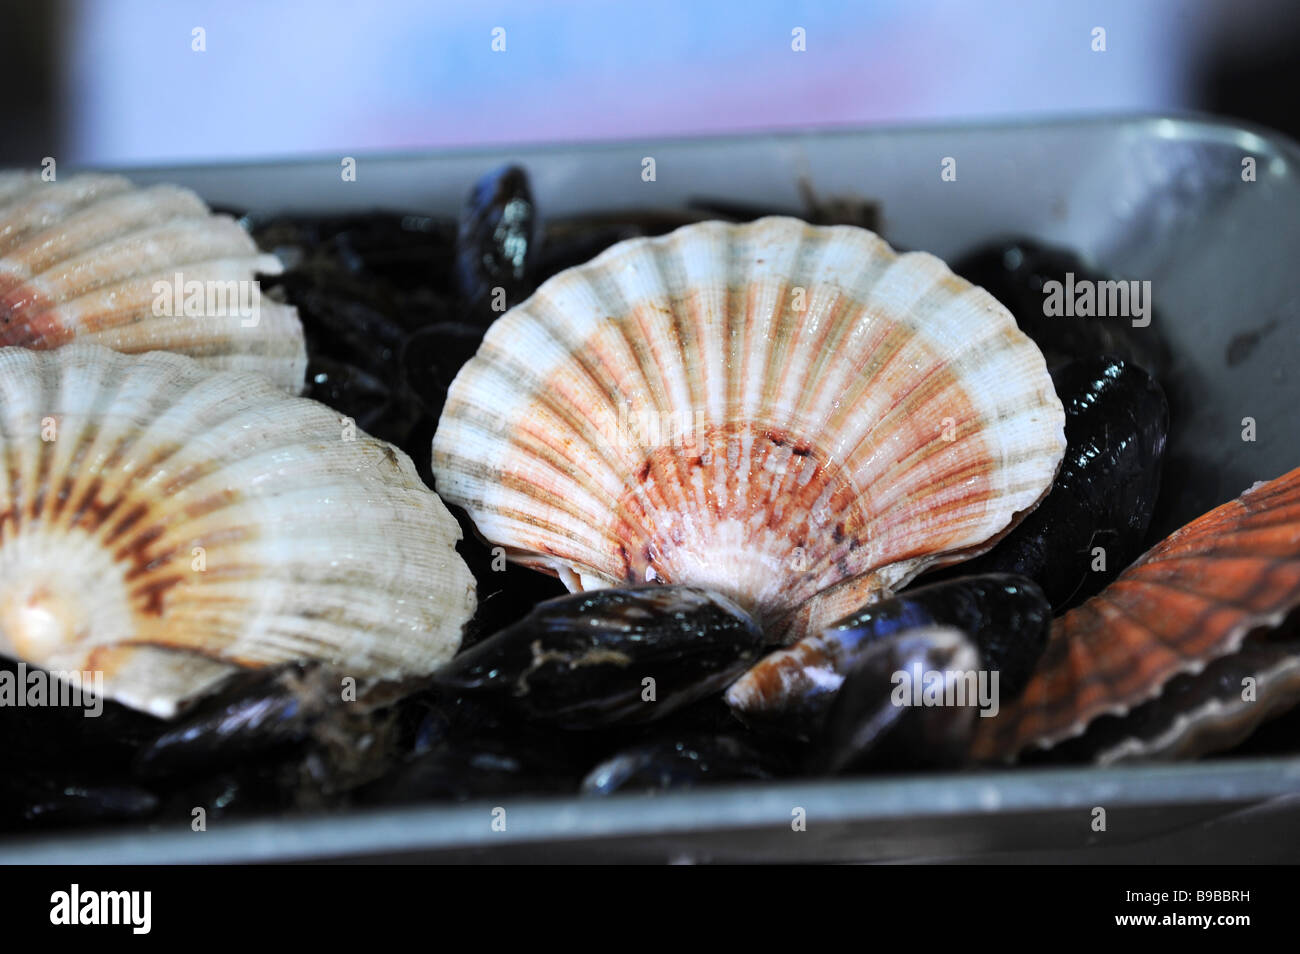 Scallop and mussel shells in a fishmongers Stock Photo